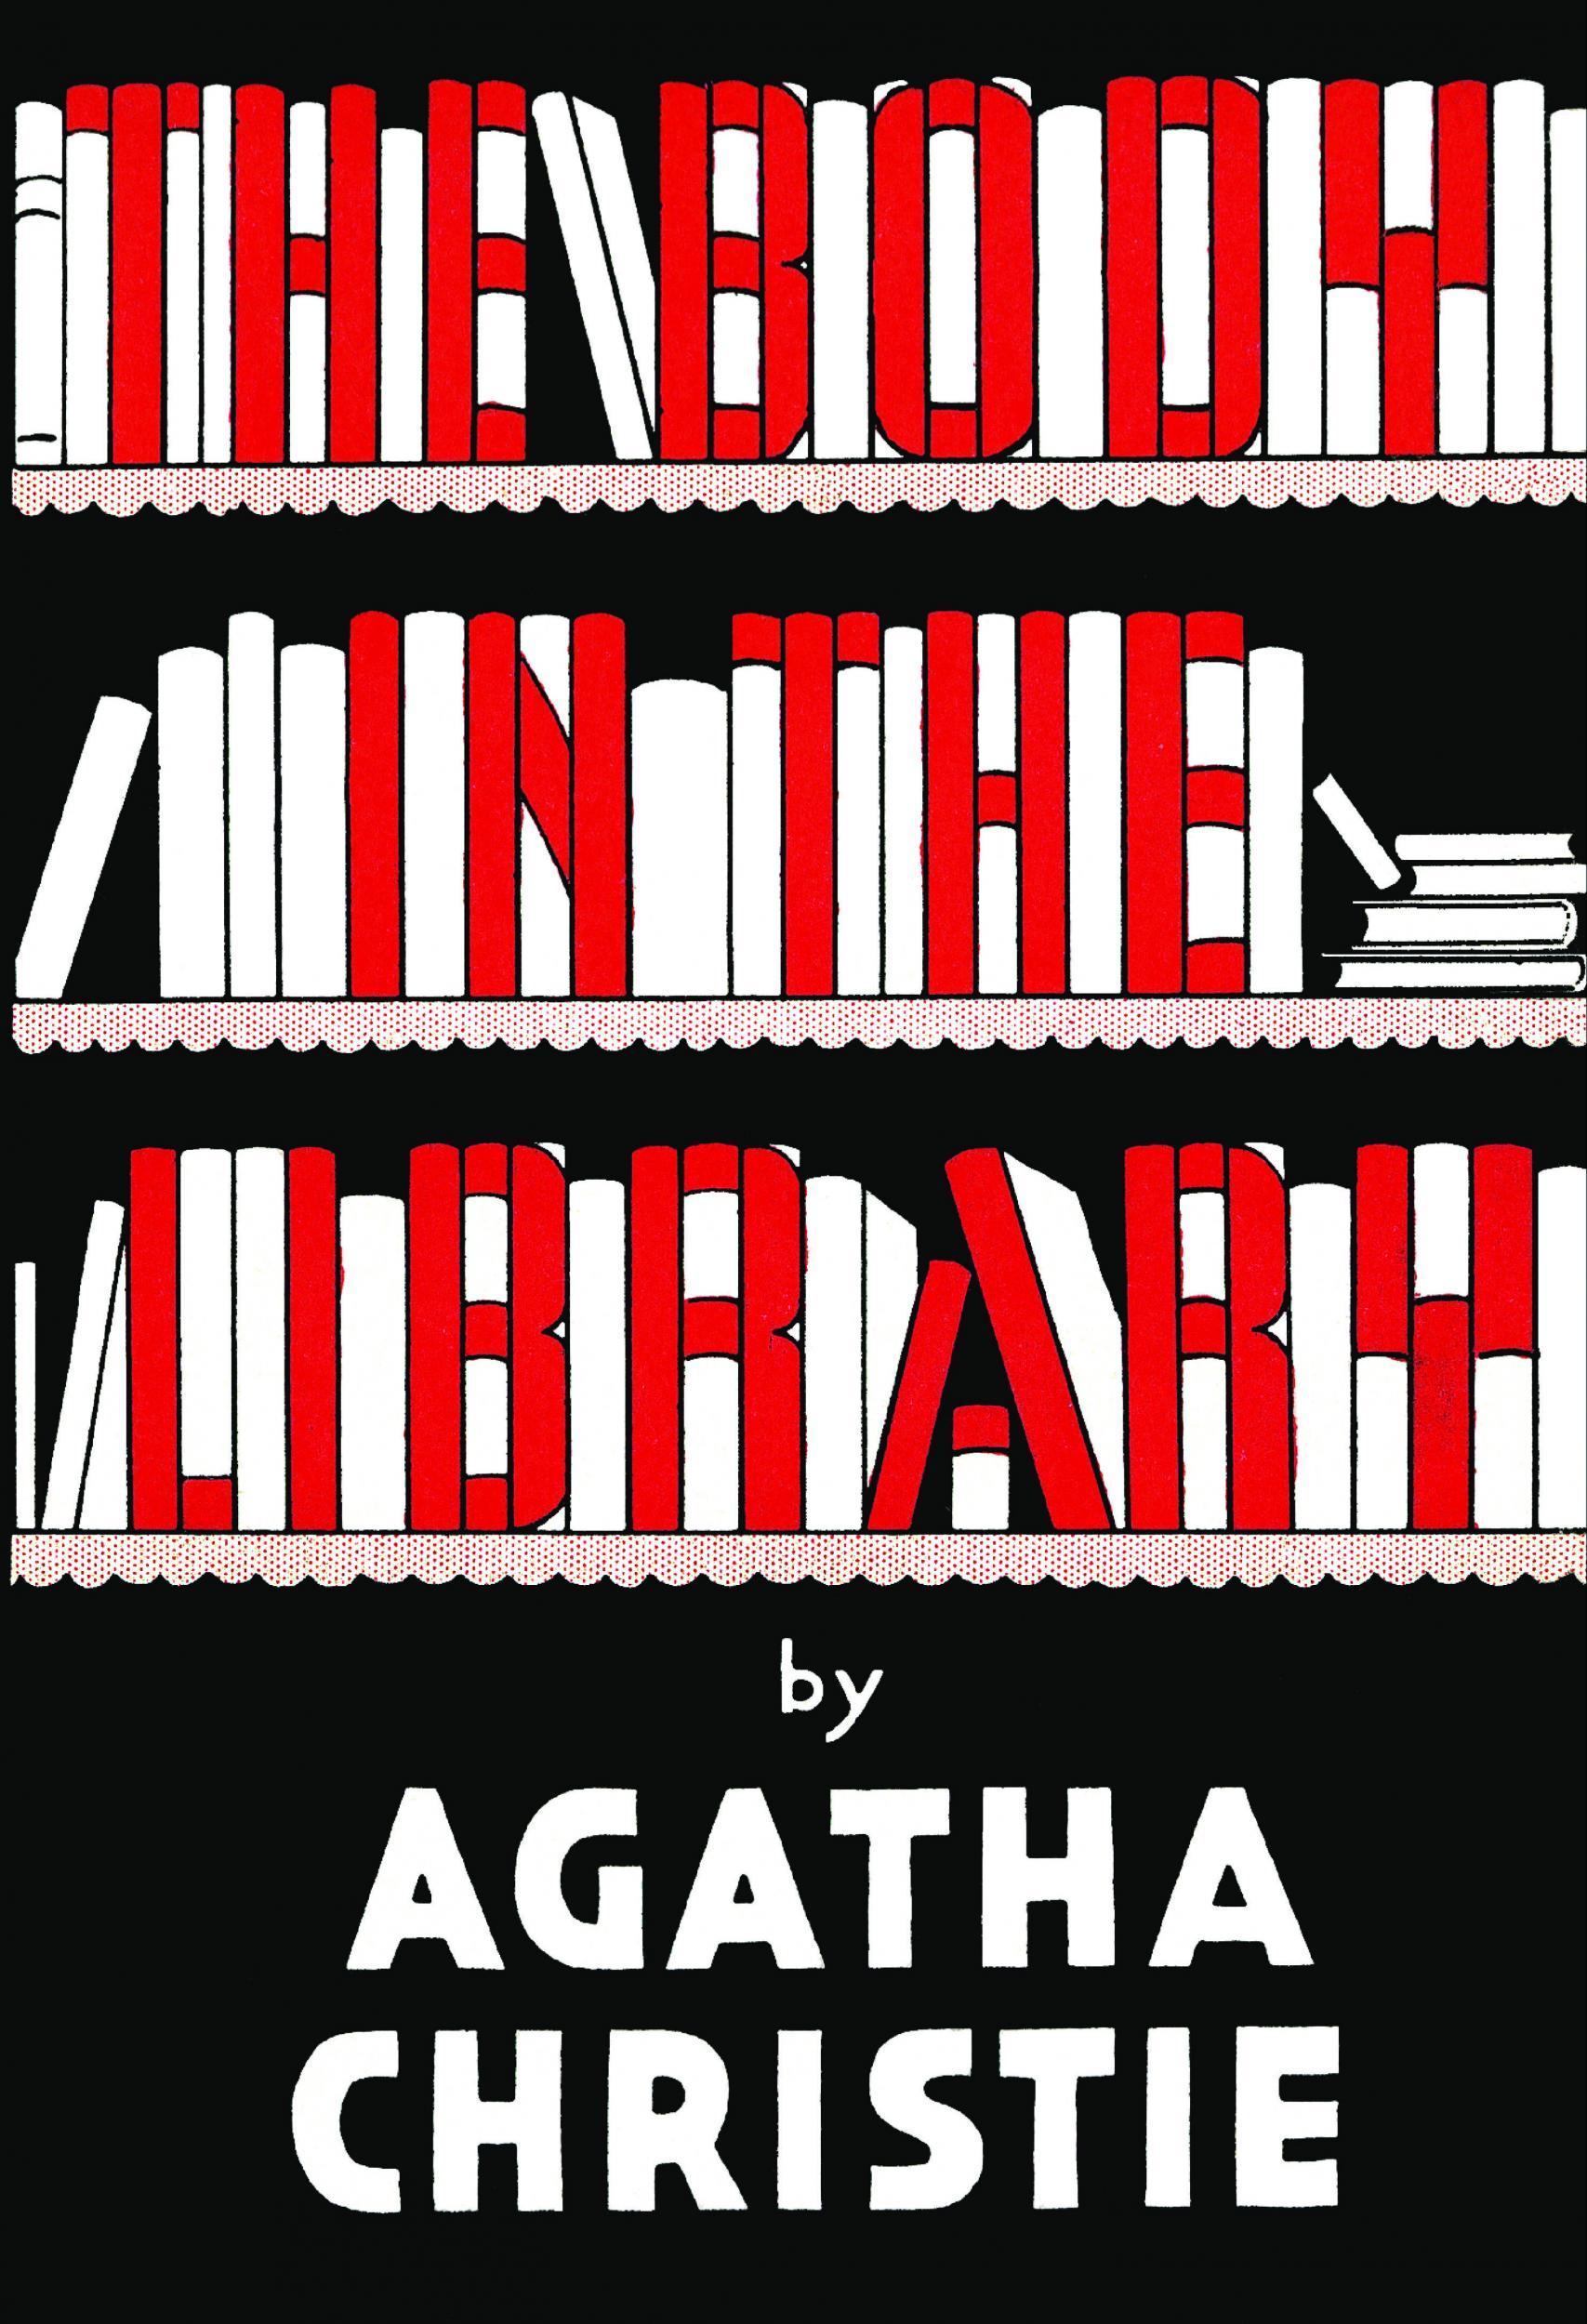 The Body in the Library: translated into 51 languages, she wrote 66 full-length murder mysteries